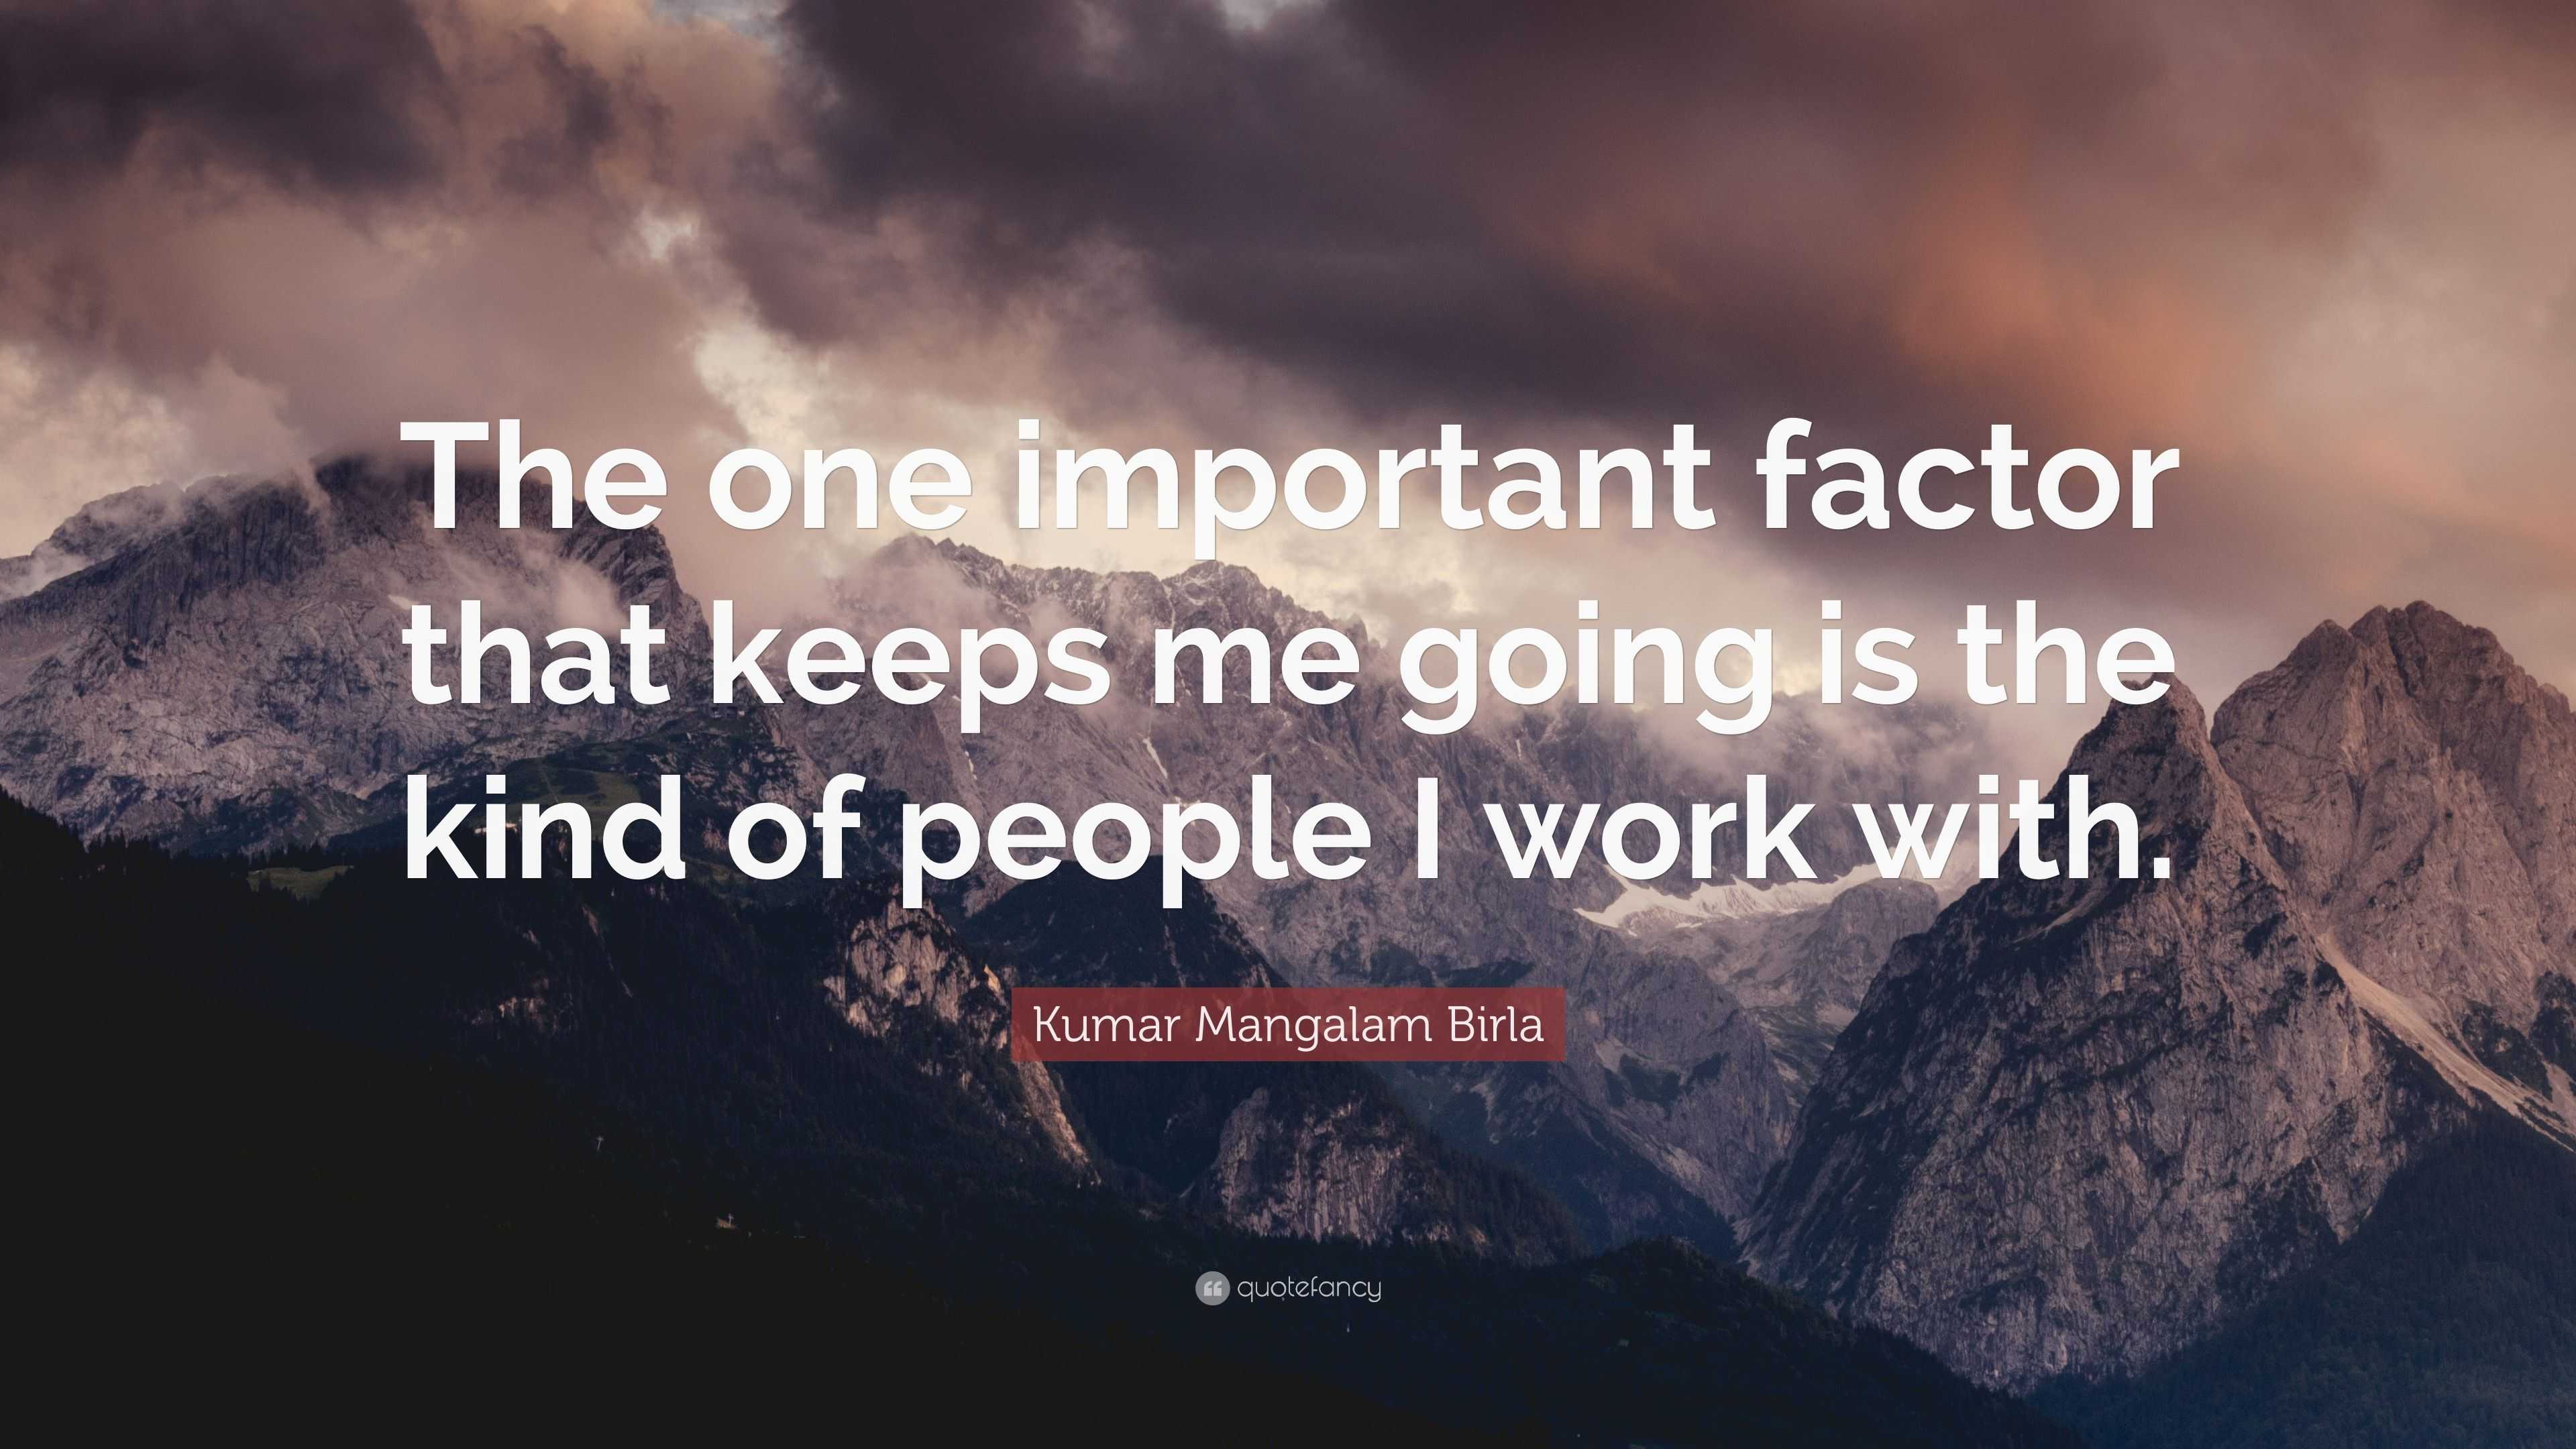 Kumar Mangalam Birla Quote: “The one important factor that keeps me